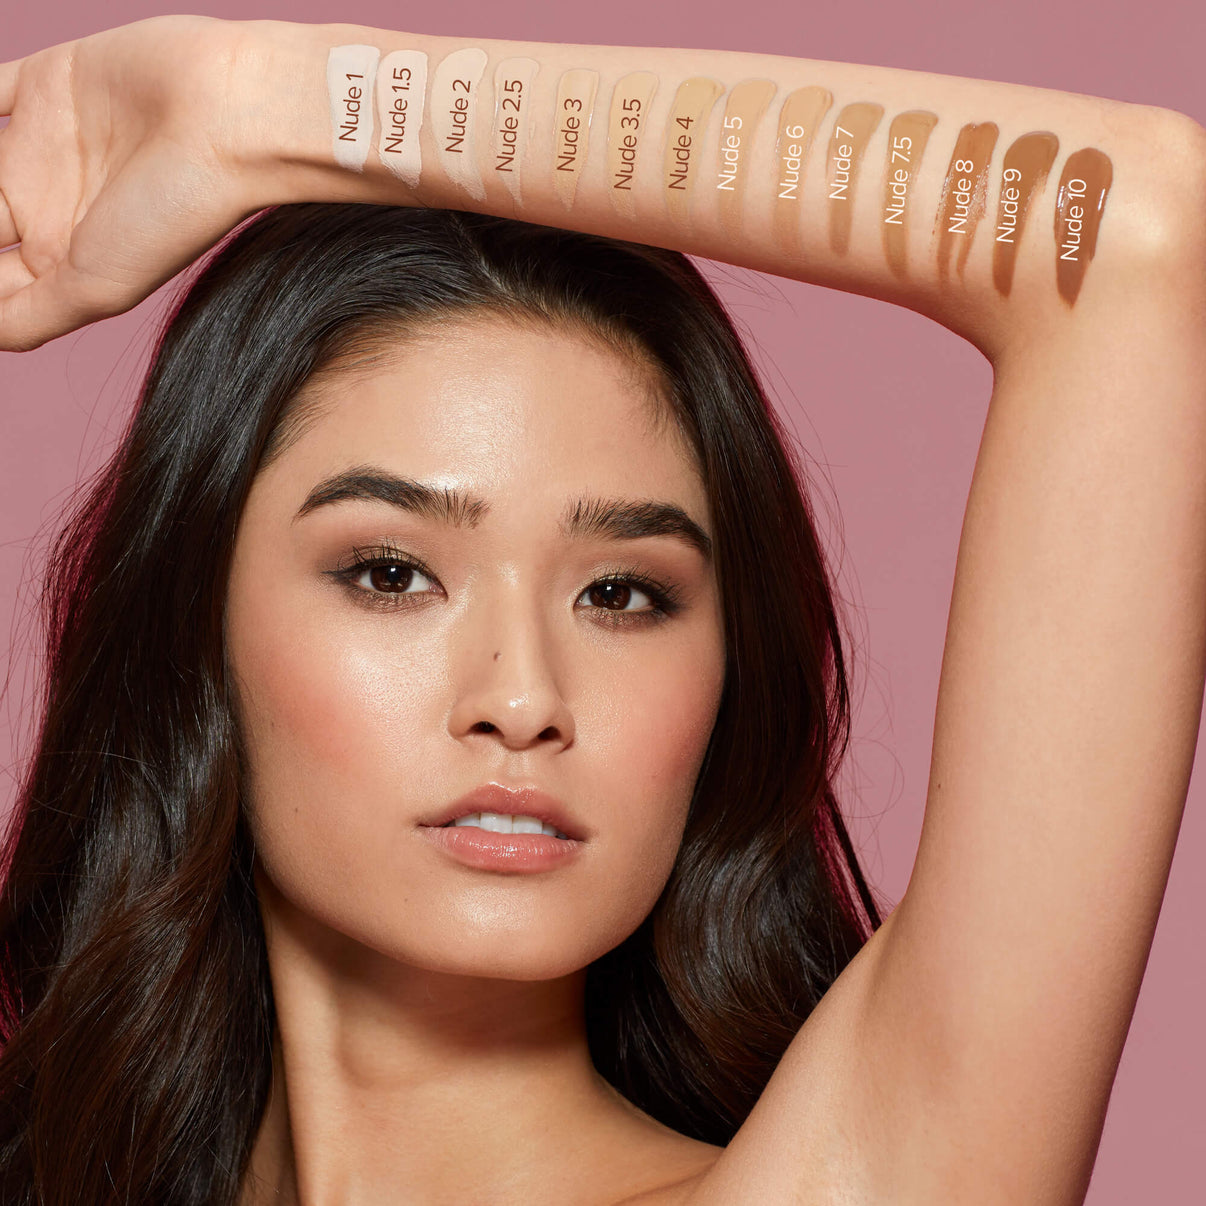 Young woman with swatches on her arm of Tinted Cover nude 7.5 and other shades